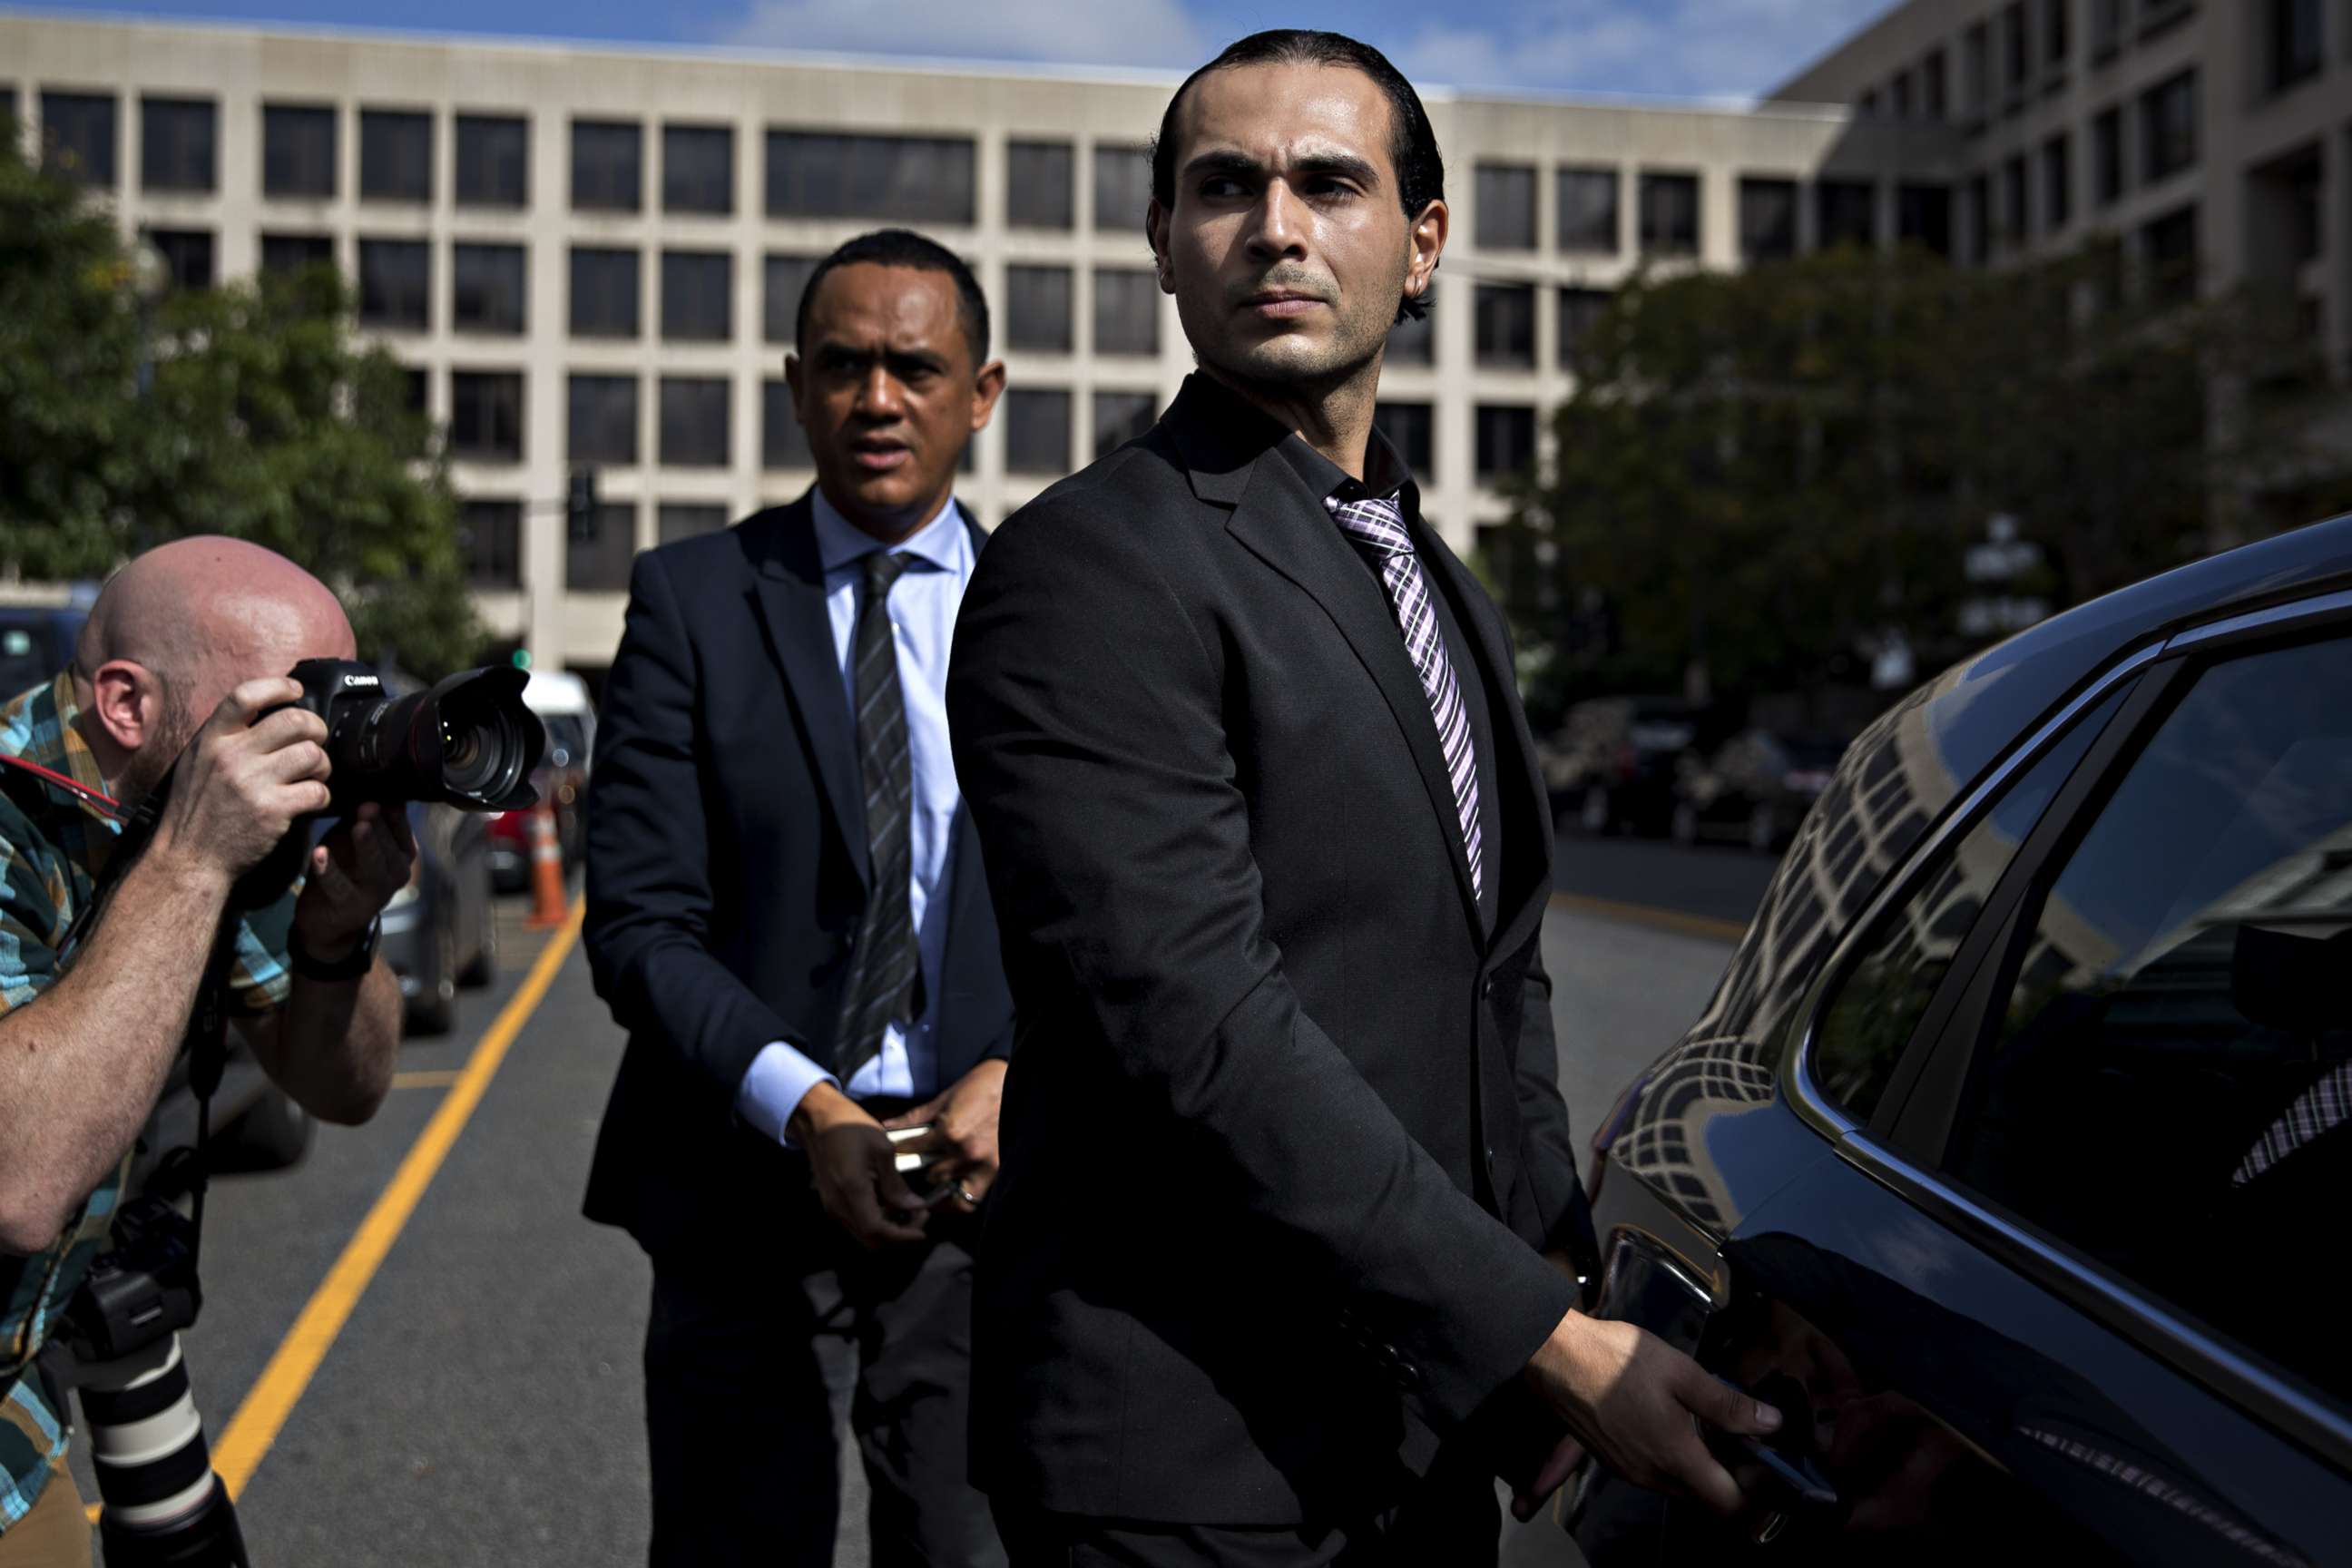 PHOTO: Richard Pinedo of Santa Paula, Calif., gets into a vehicle outside federal court after sentencing in Washington, D.C., Oct. 10, 2018.